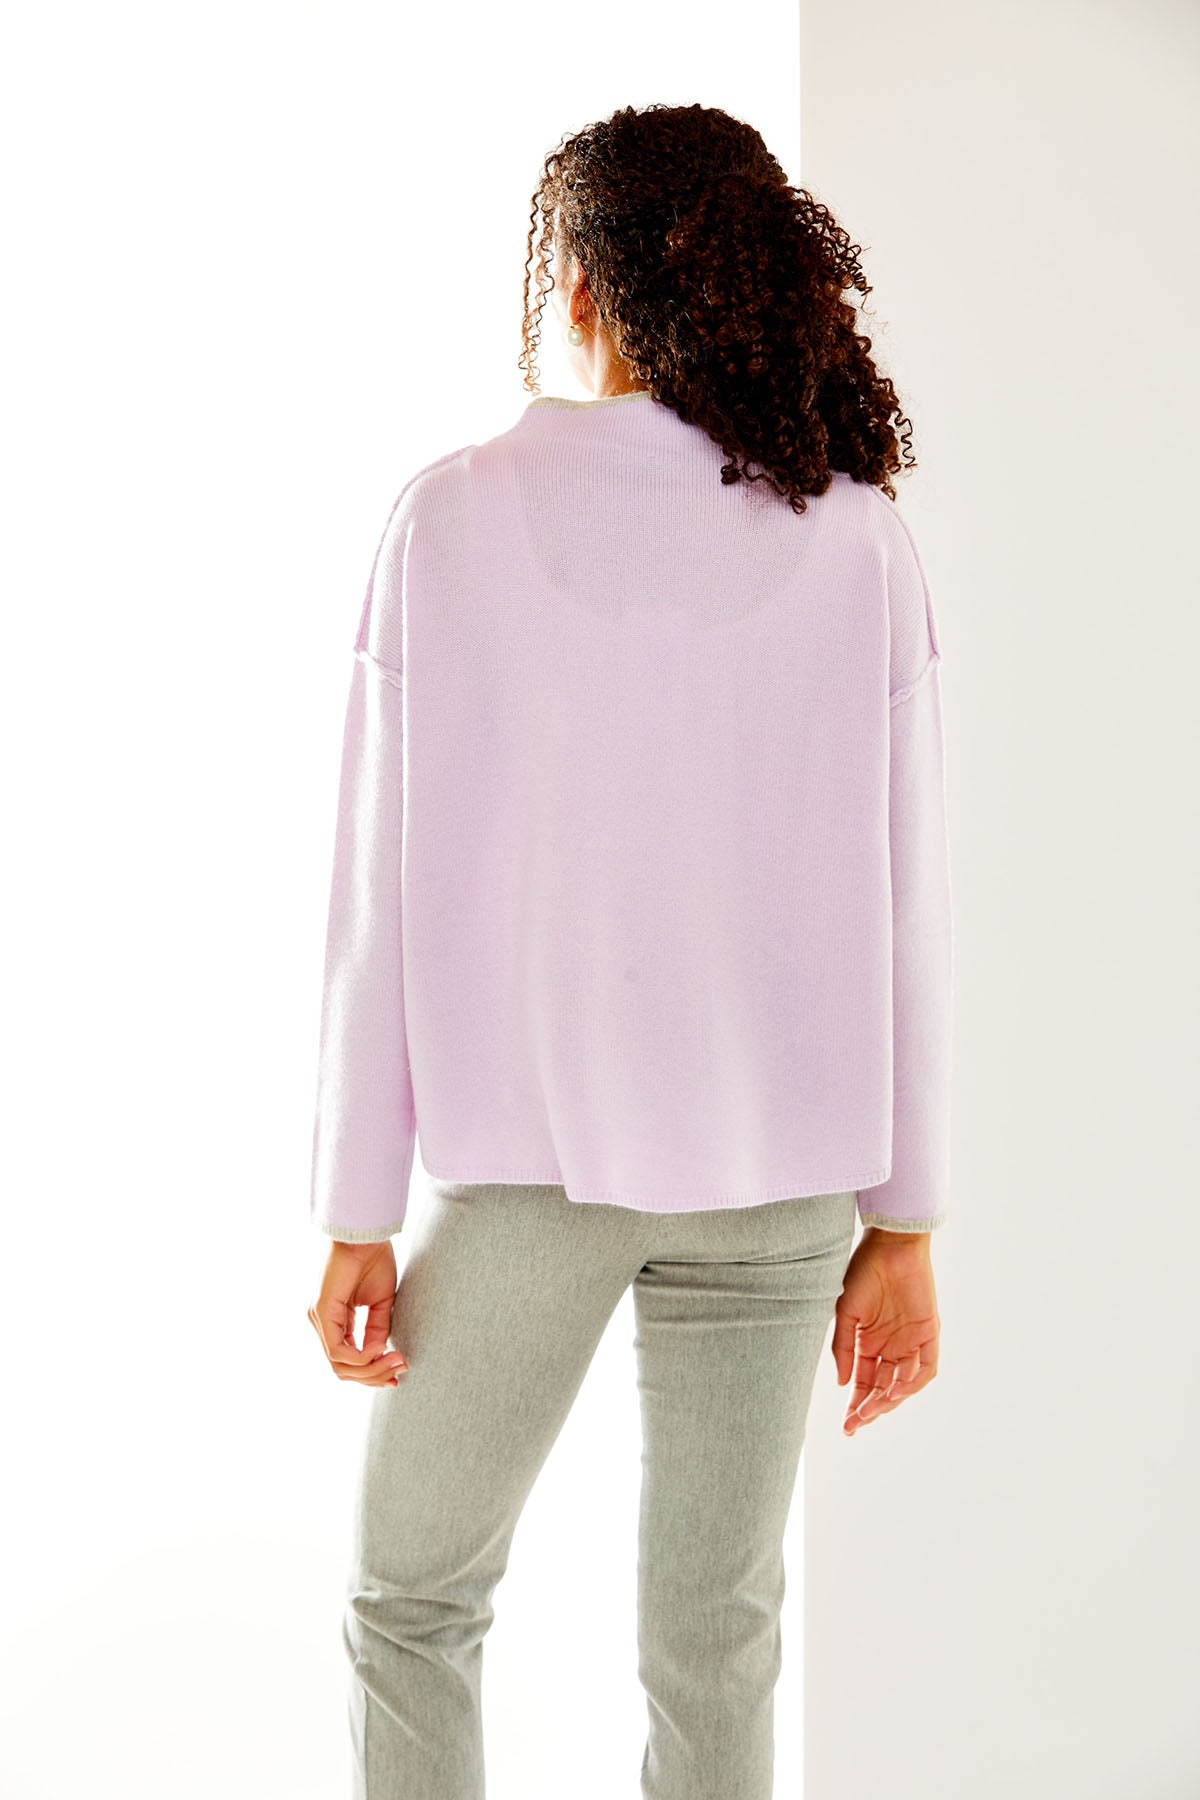 Woman in lavender sweater